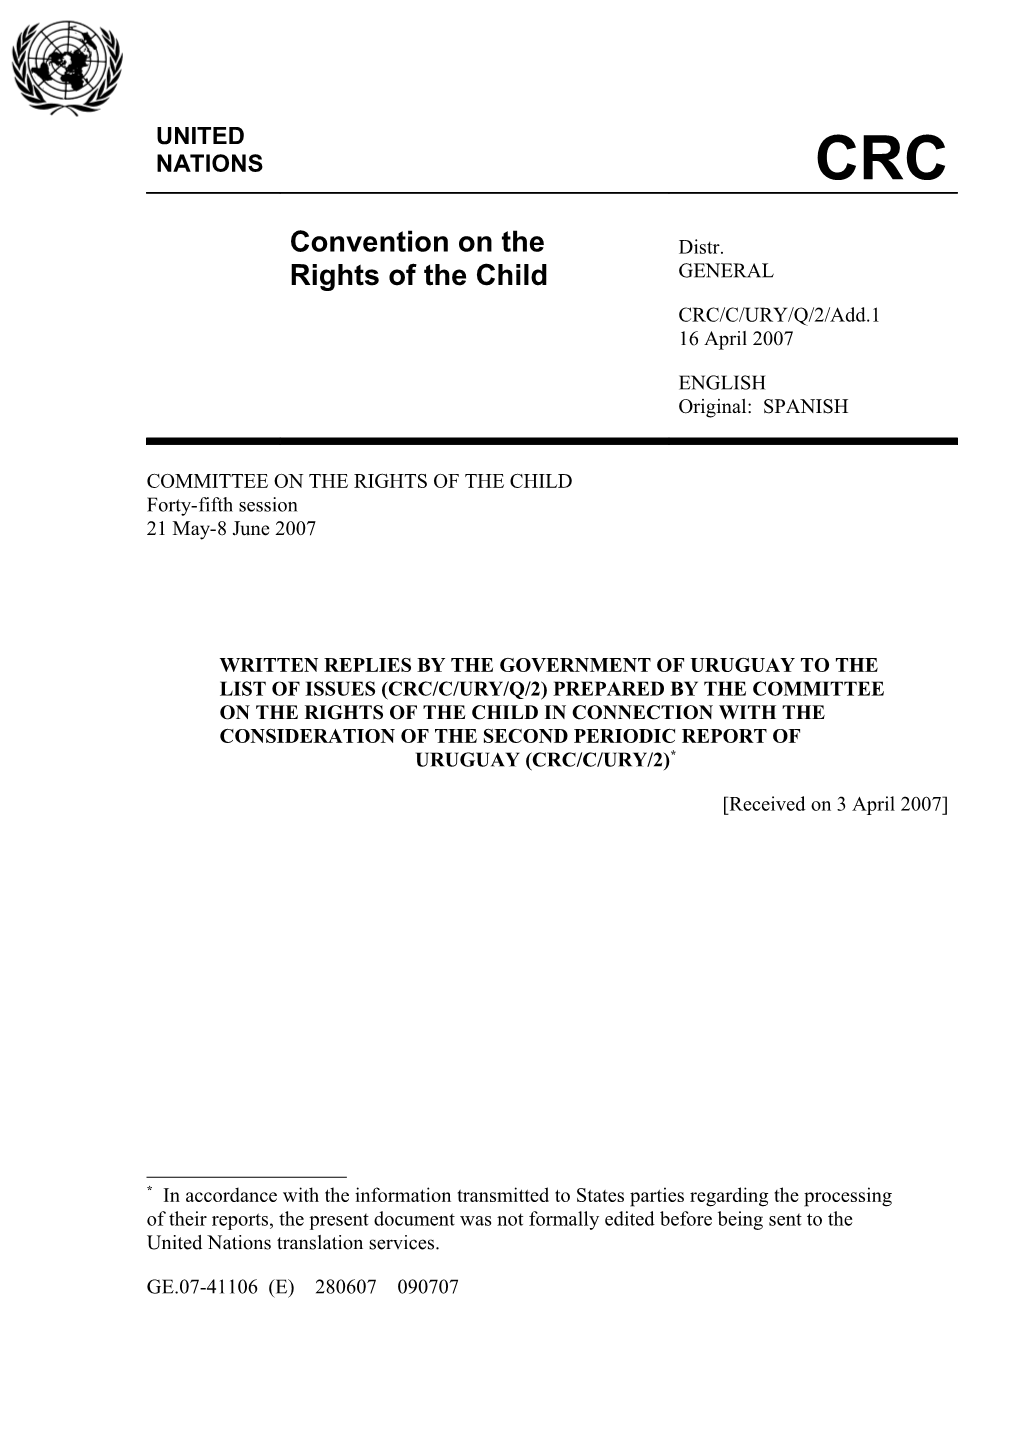 Written Replies by the Government of Uruguay to Thelist of Issues (Crc/C/Ury/Q/2) Prepared